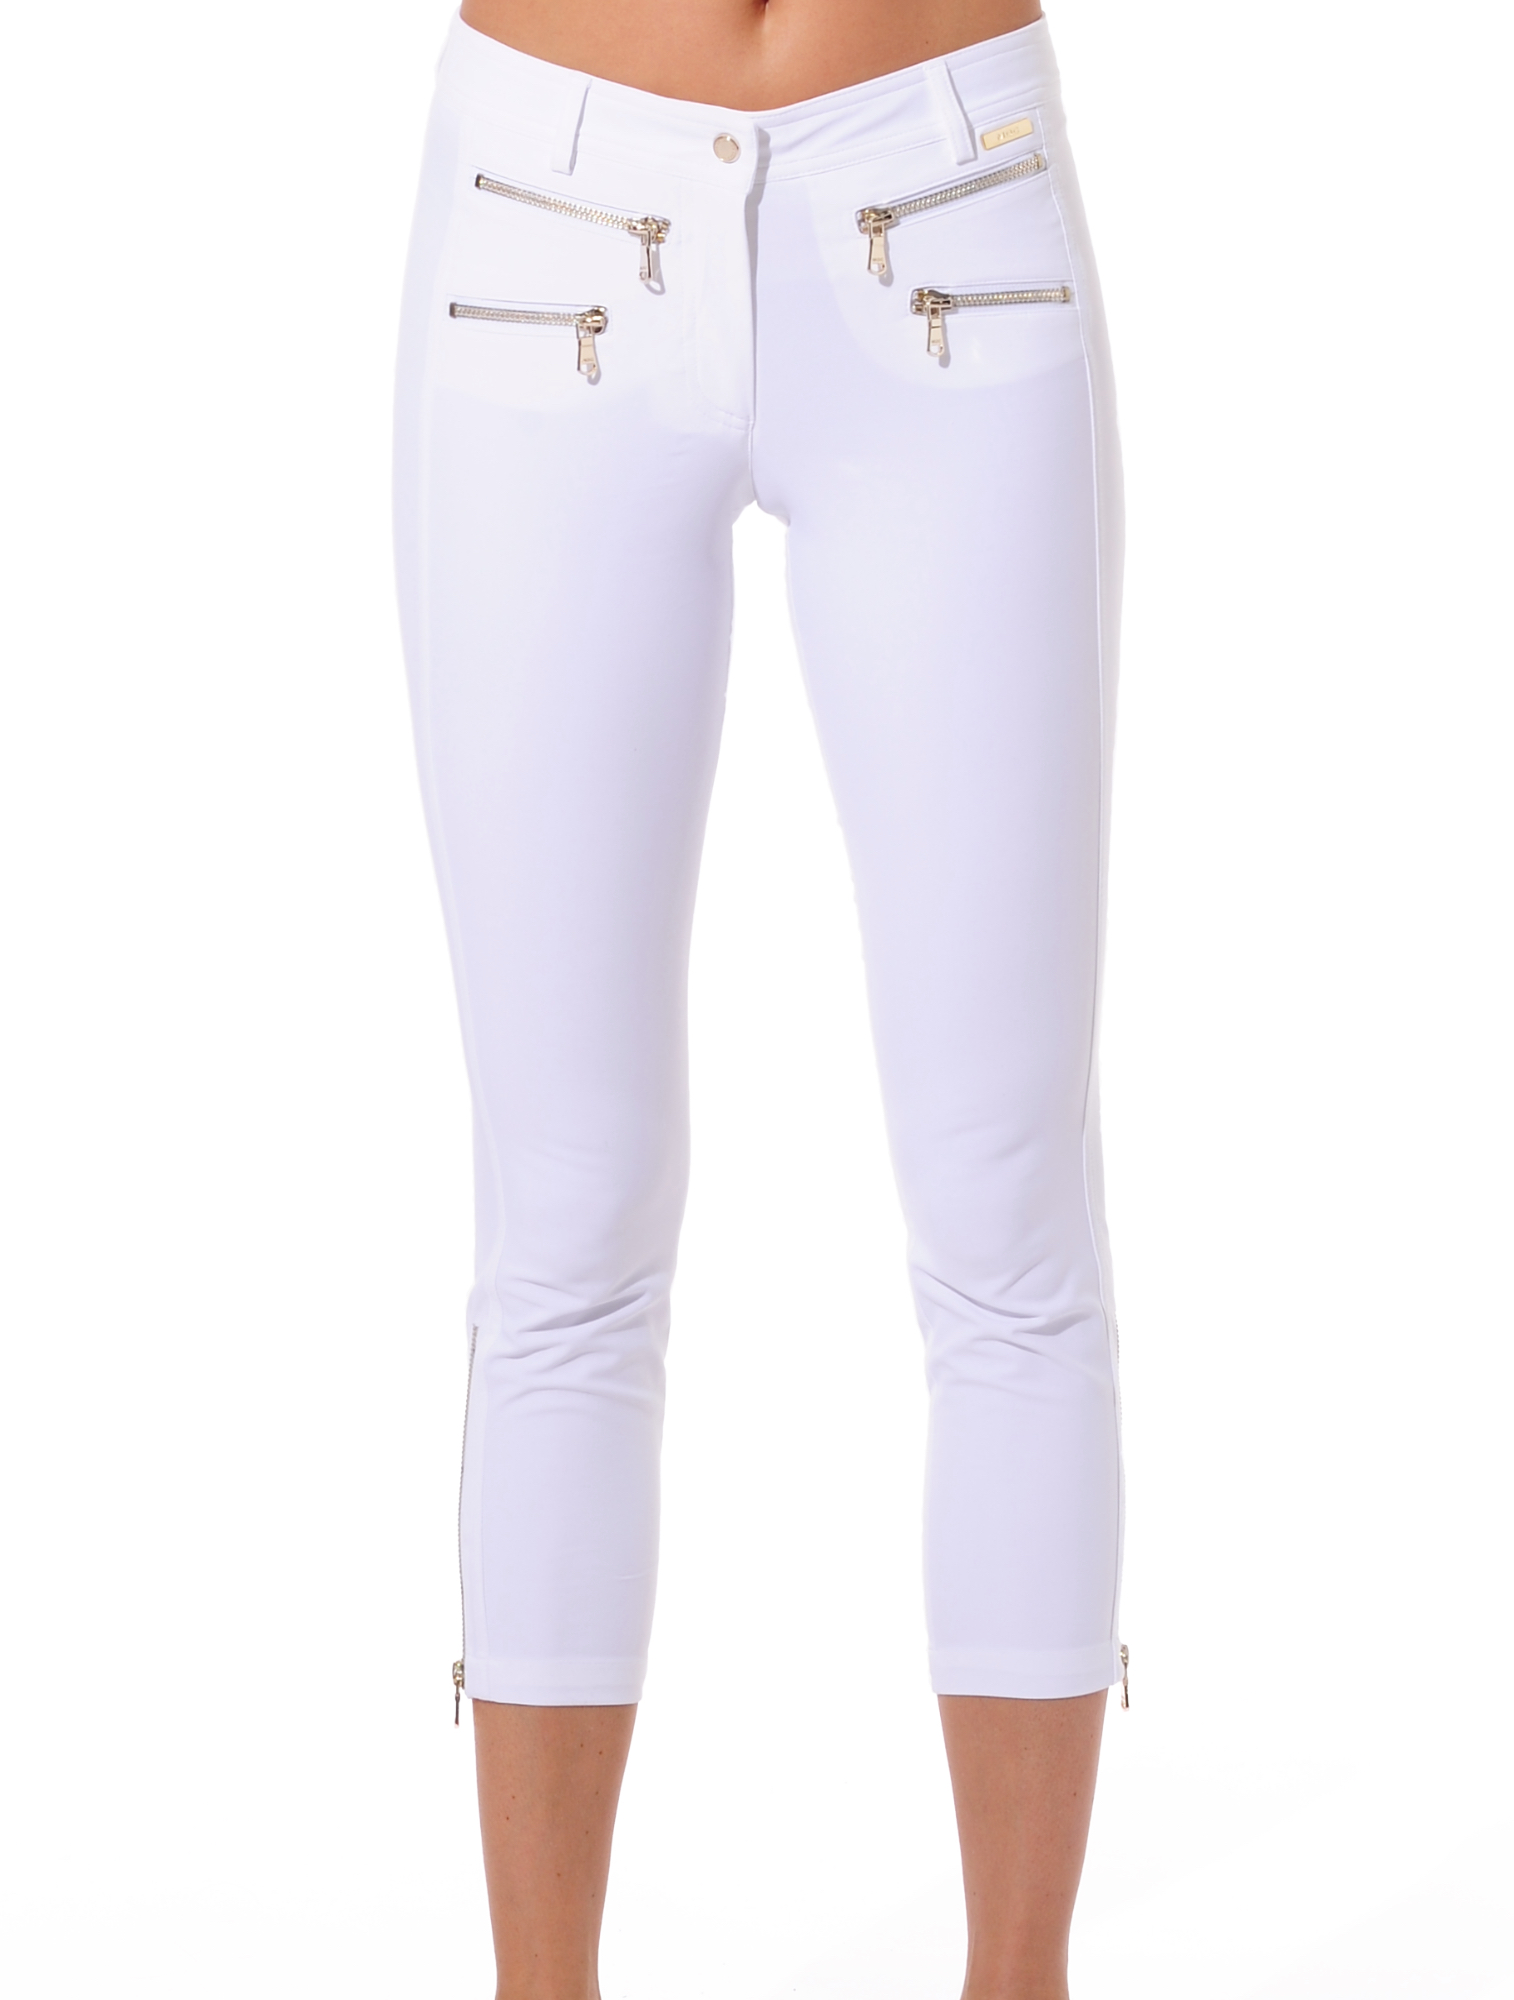 4way stretch double zip cropped pants white 